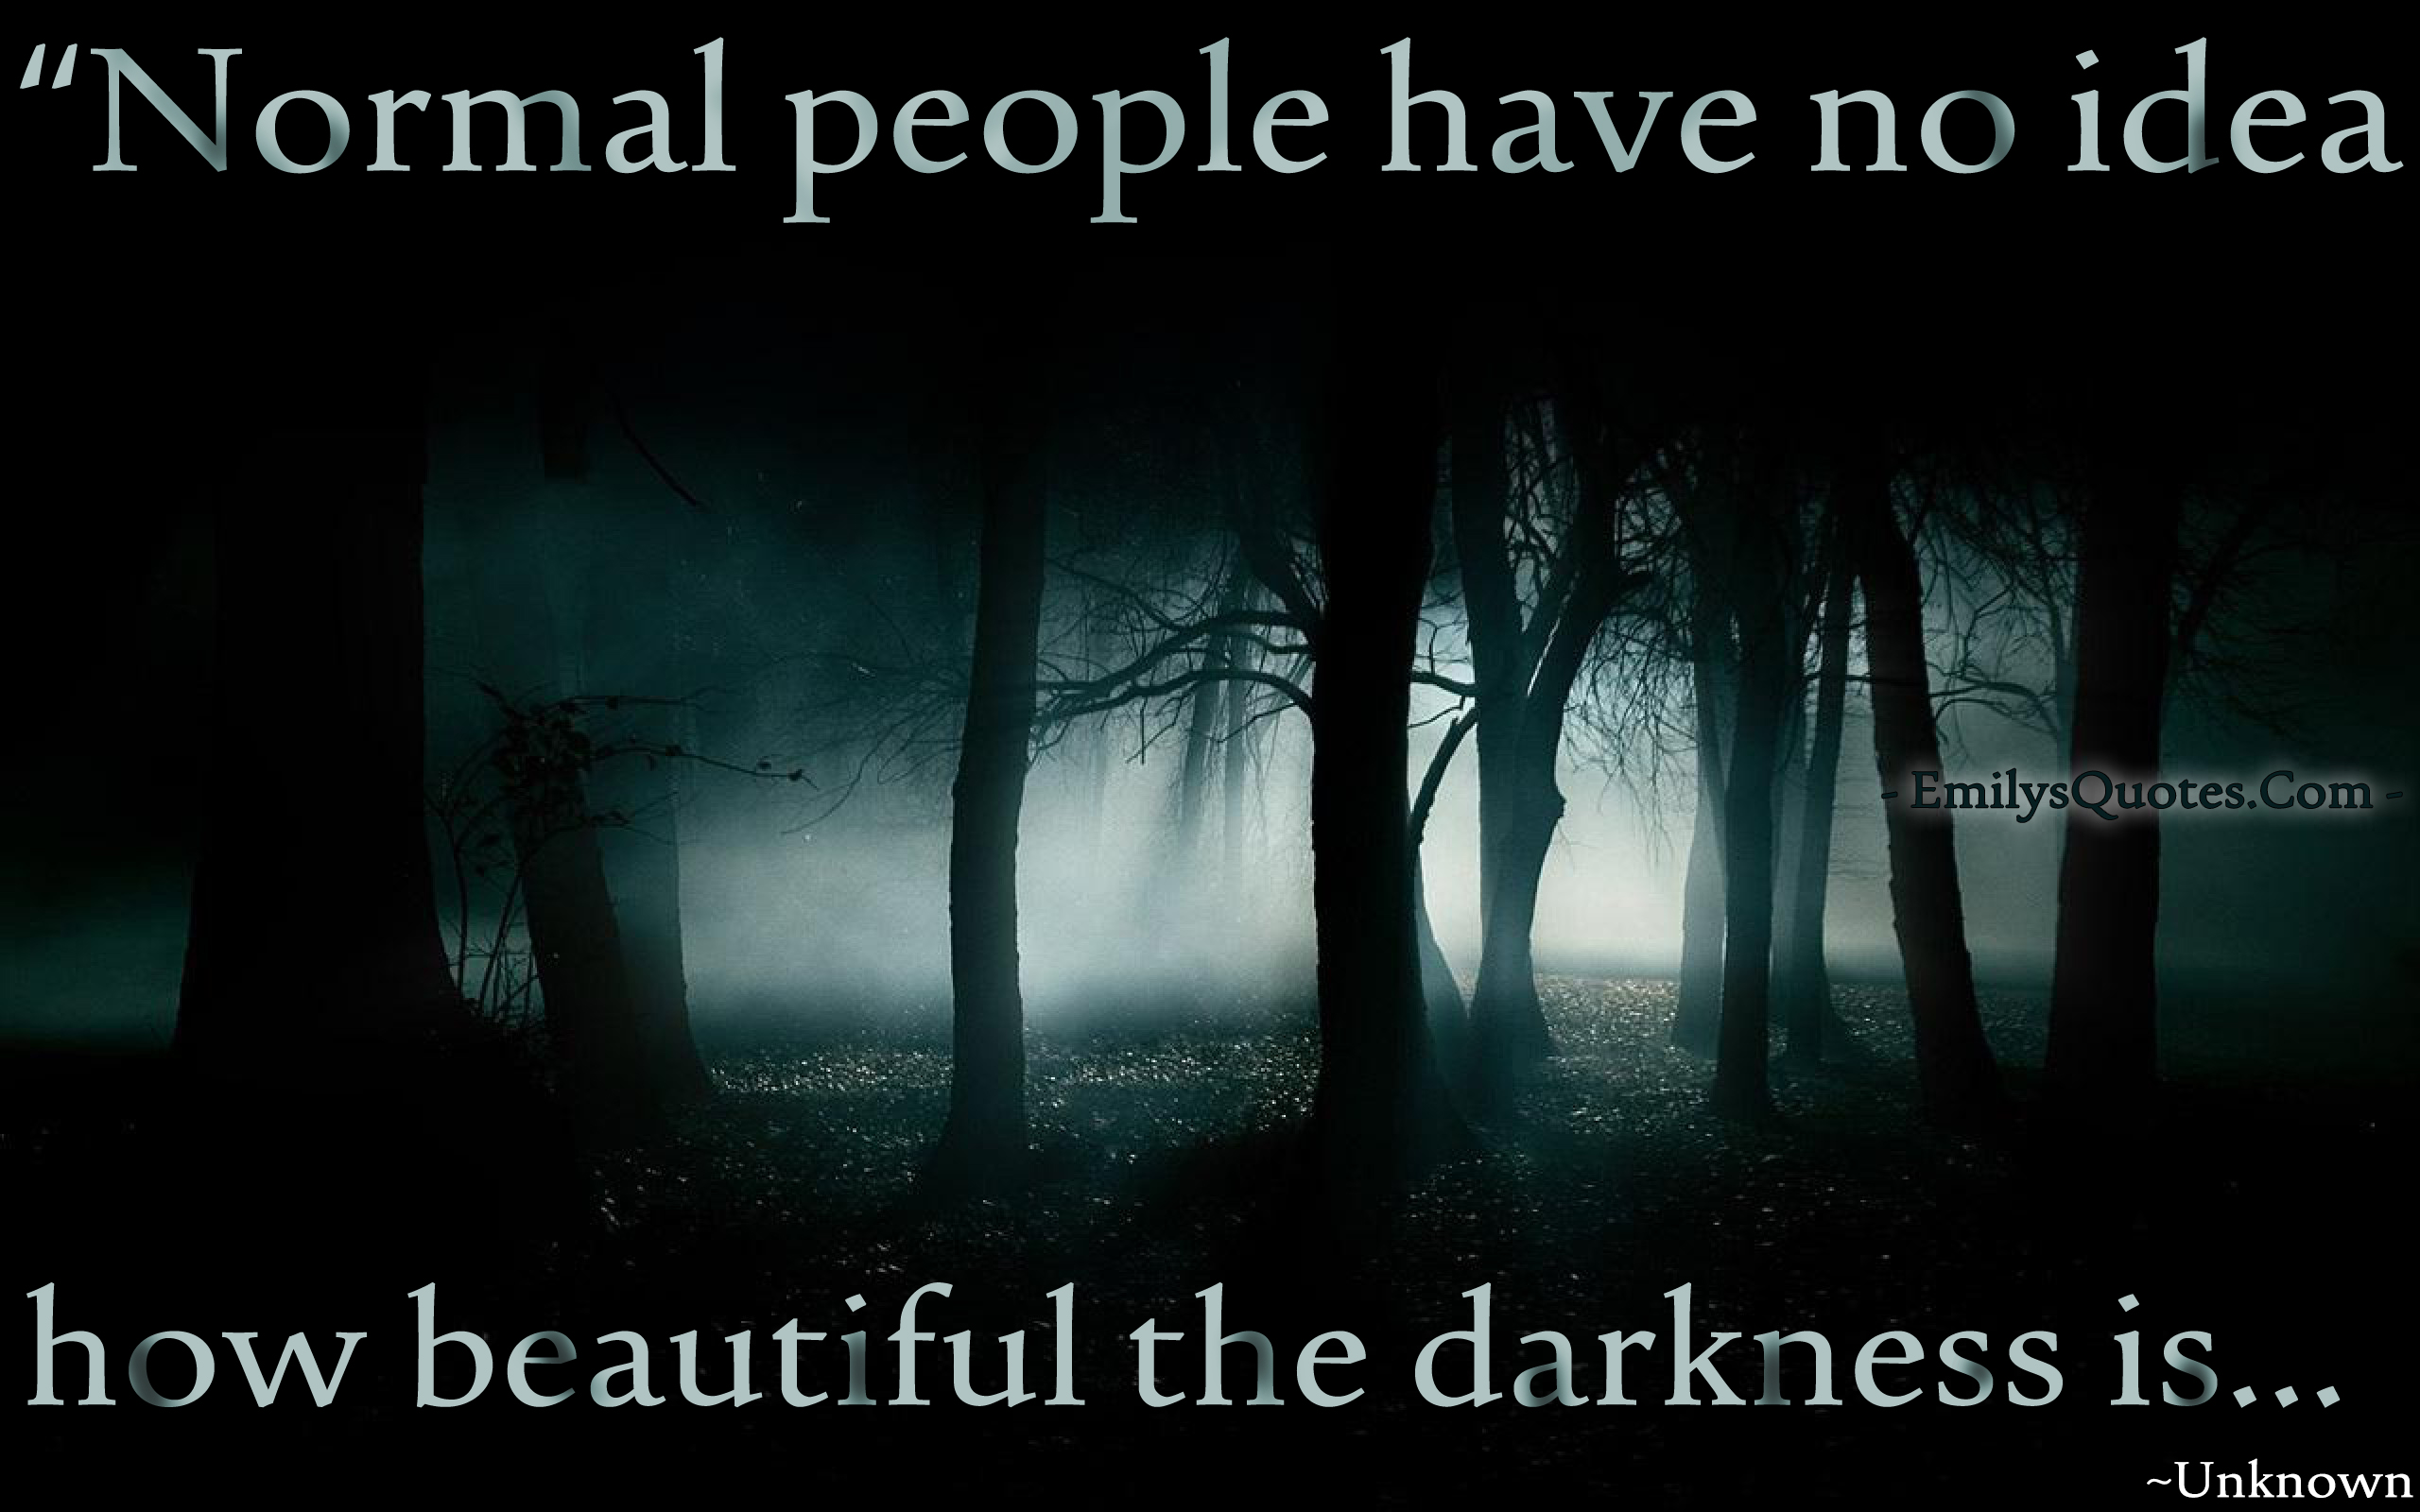 Normal people have no idea how beautiful the darkness is…